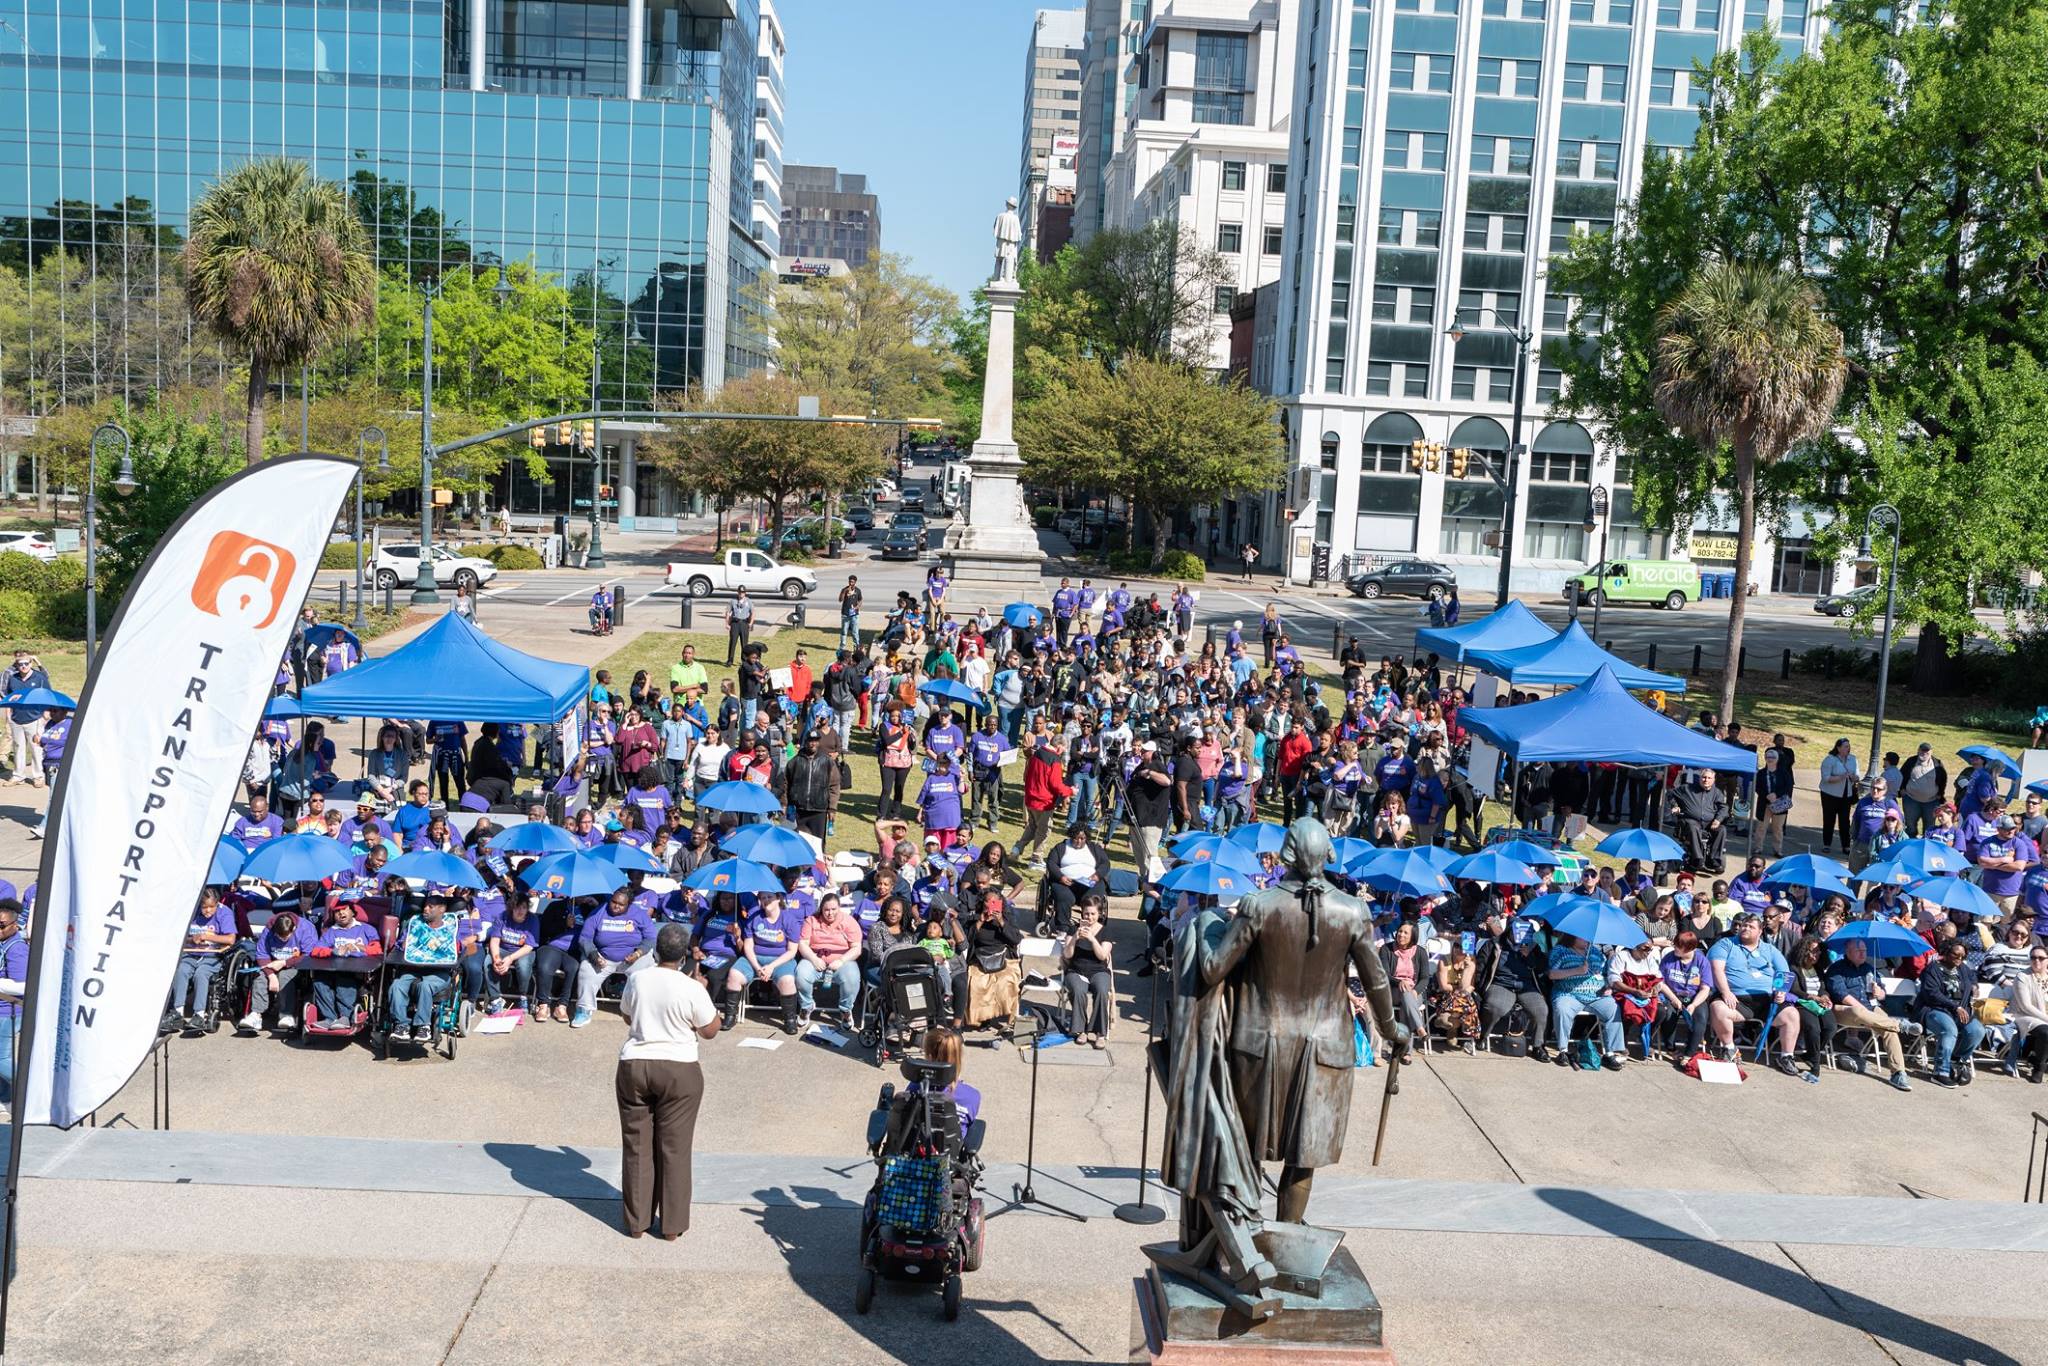 Photo of SC Statehouse grounds taken from the steps of the statehouse looking down at the crowd at Advocacy Day in 2019. A speaker is centered on the steps and people in purple shirts with blue umbrellas are watching.